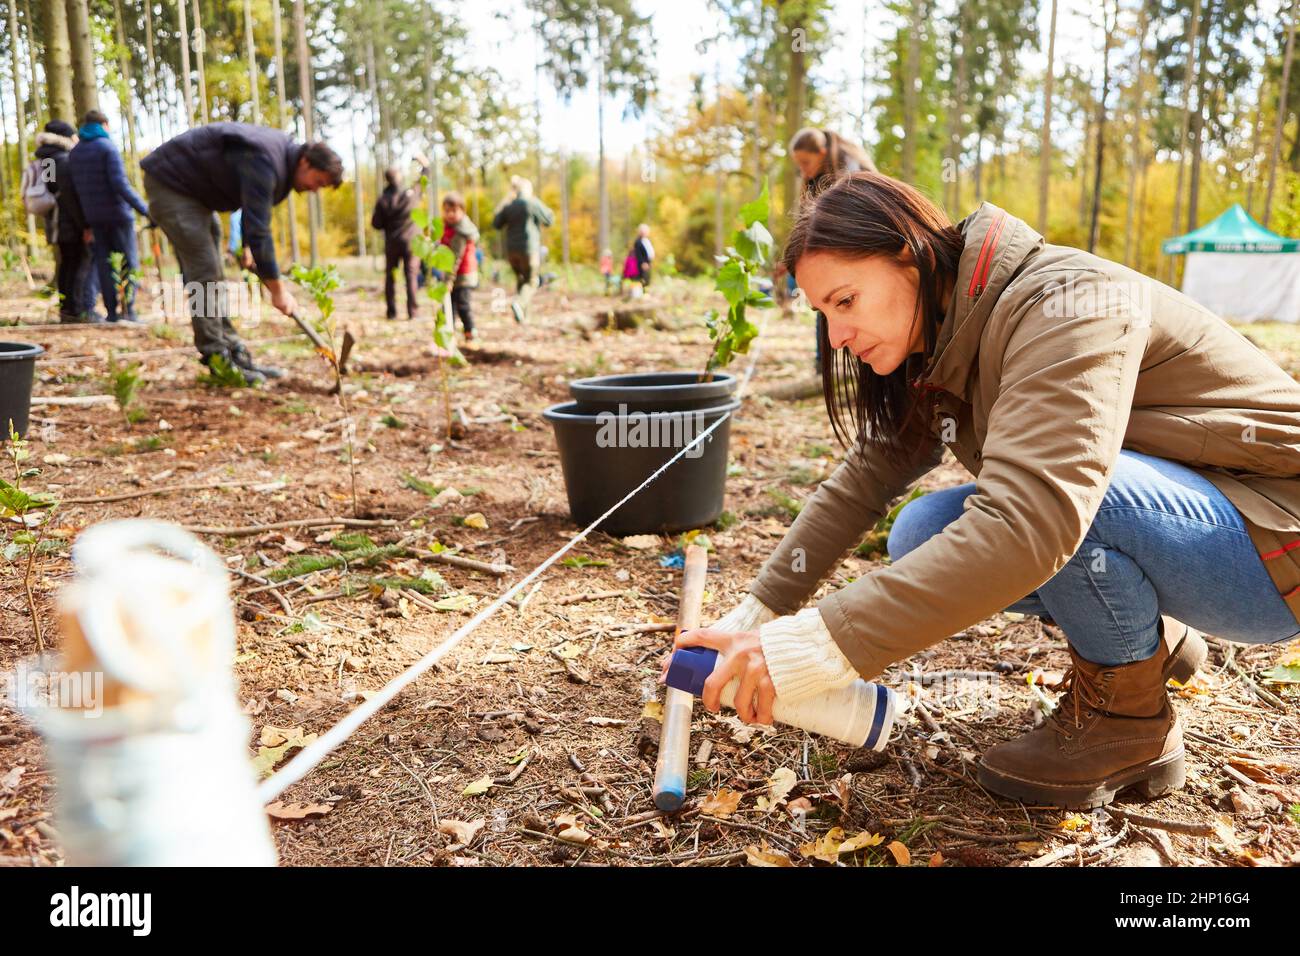 Woman marks a tree pole with a spray can in preparation for reforestation in the forest Stock Photo